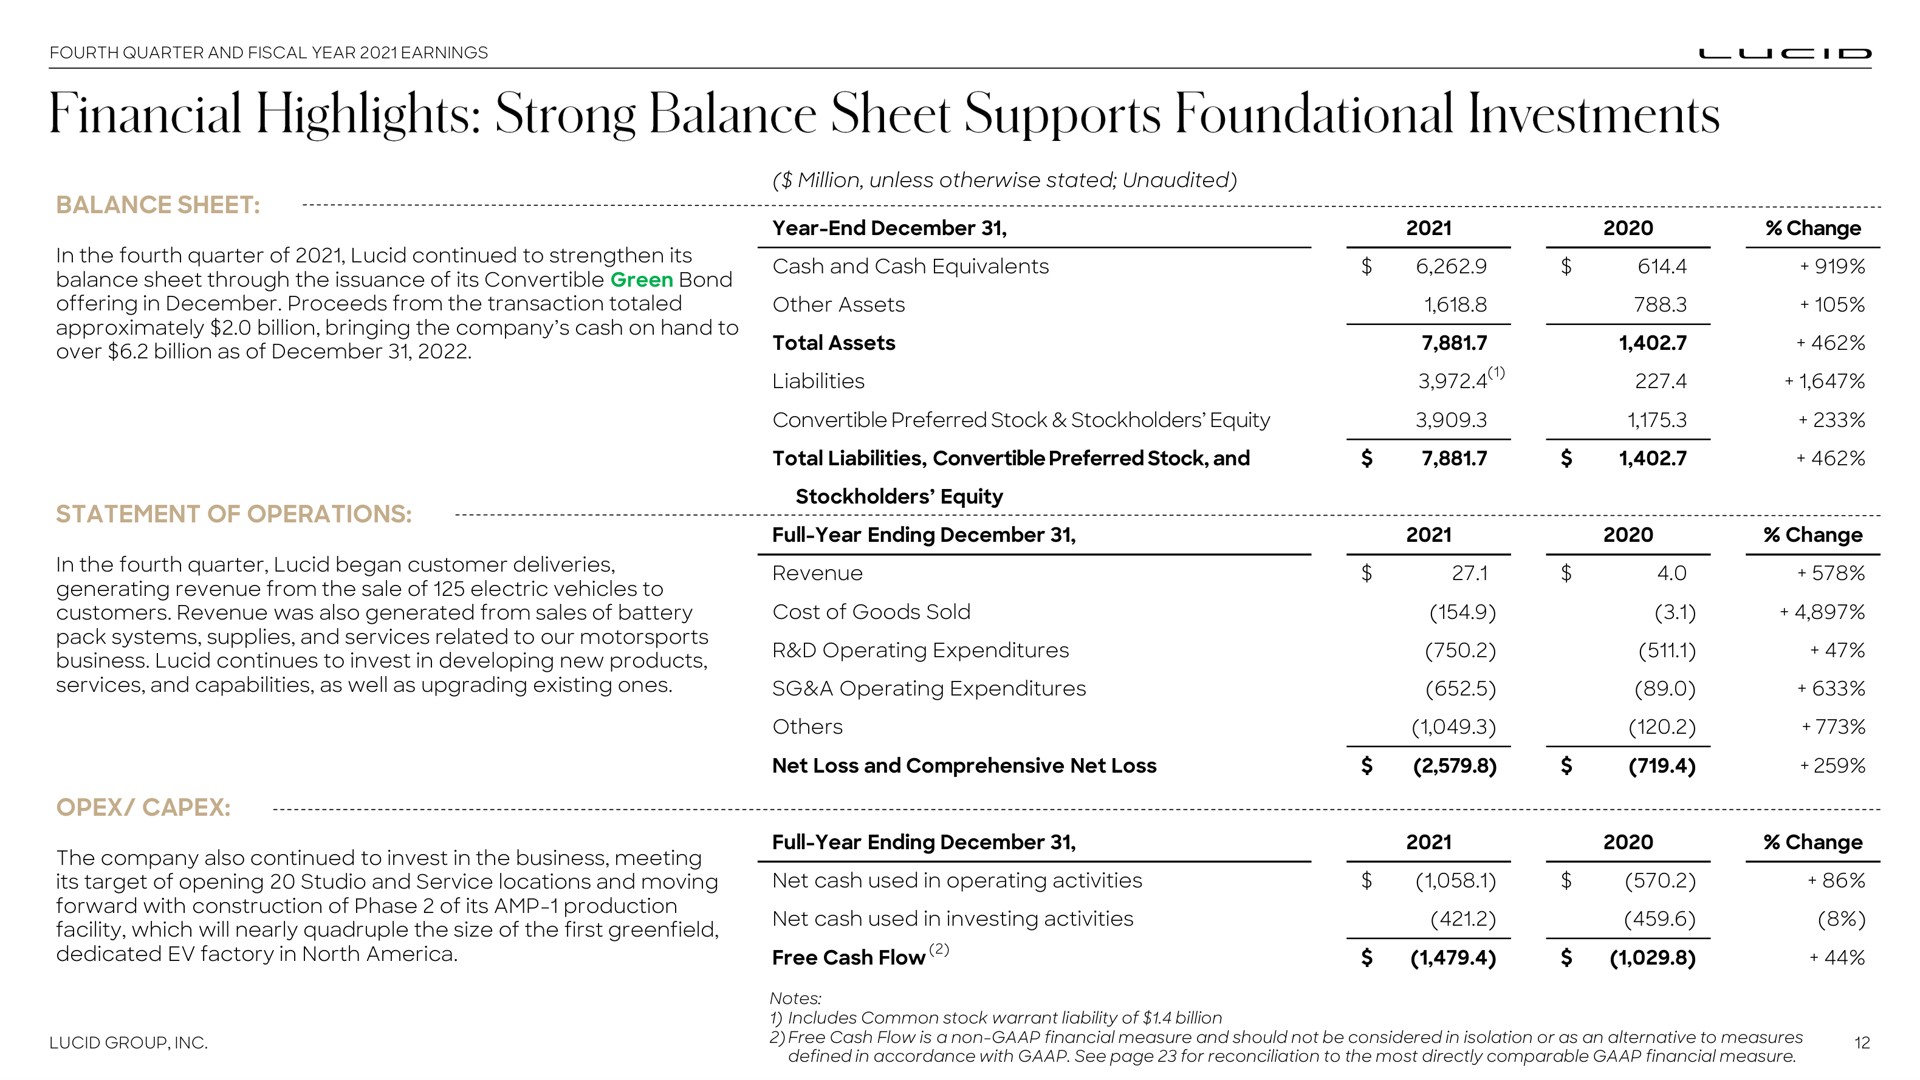 balance sheet in the fourth quarter of lucid continued to strengthen its balance sheet through the issuance of its convertible green bond offering in proceeds from the transaction totaled approximately billion bringing the company cash on hand to over billion as of year end cash and cash equivalents other assets total assets liabilities million unless otherwise stated unaudited convertible preferred stock stockholders equity change statement of operations in the fourth quarter lucid began customer deliveries generating revenue from the sale of electric vehicles to customers revenue was also generated from sales of battery pack systems supplies and services related to our business lucid continues to invest in developing new products services and capabilities as well as upgrading existing ones total liabilities convertible preferred stock and stockholders equity full year ending change revenue cost of goods sold operating expenditures a operating expenditures net loss and comprehensive net loss the company also continued to invest in the business meeting its target of opening studio and service locations and moving forward with construction of phase of its production facility which will nearly quadruple the size of the first dedicated factory in north full year ending net cash used in operating activities net cash used in investing activities free cash flow change financial highlights strong supports foundational investments full | Lucid Motors